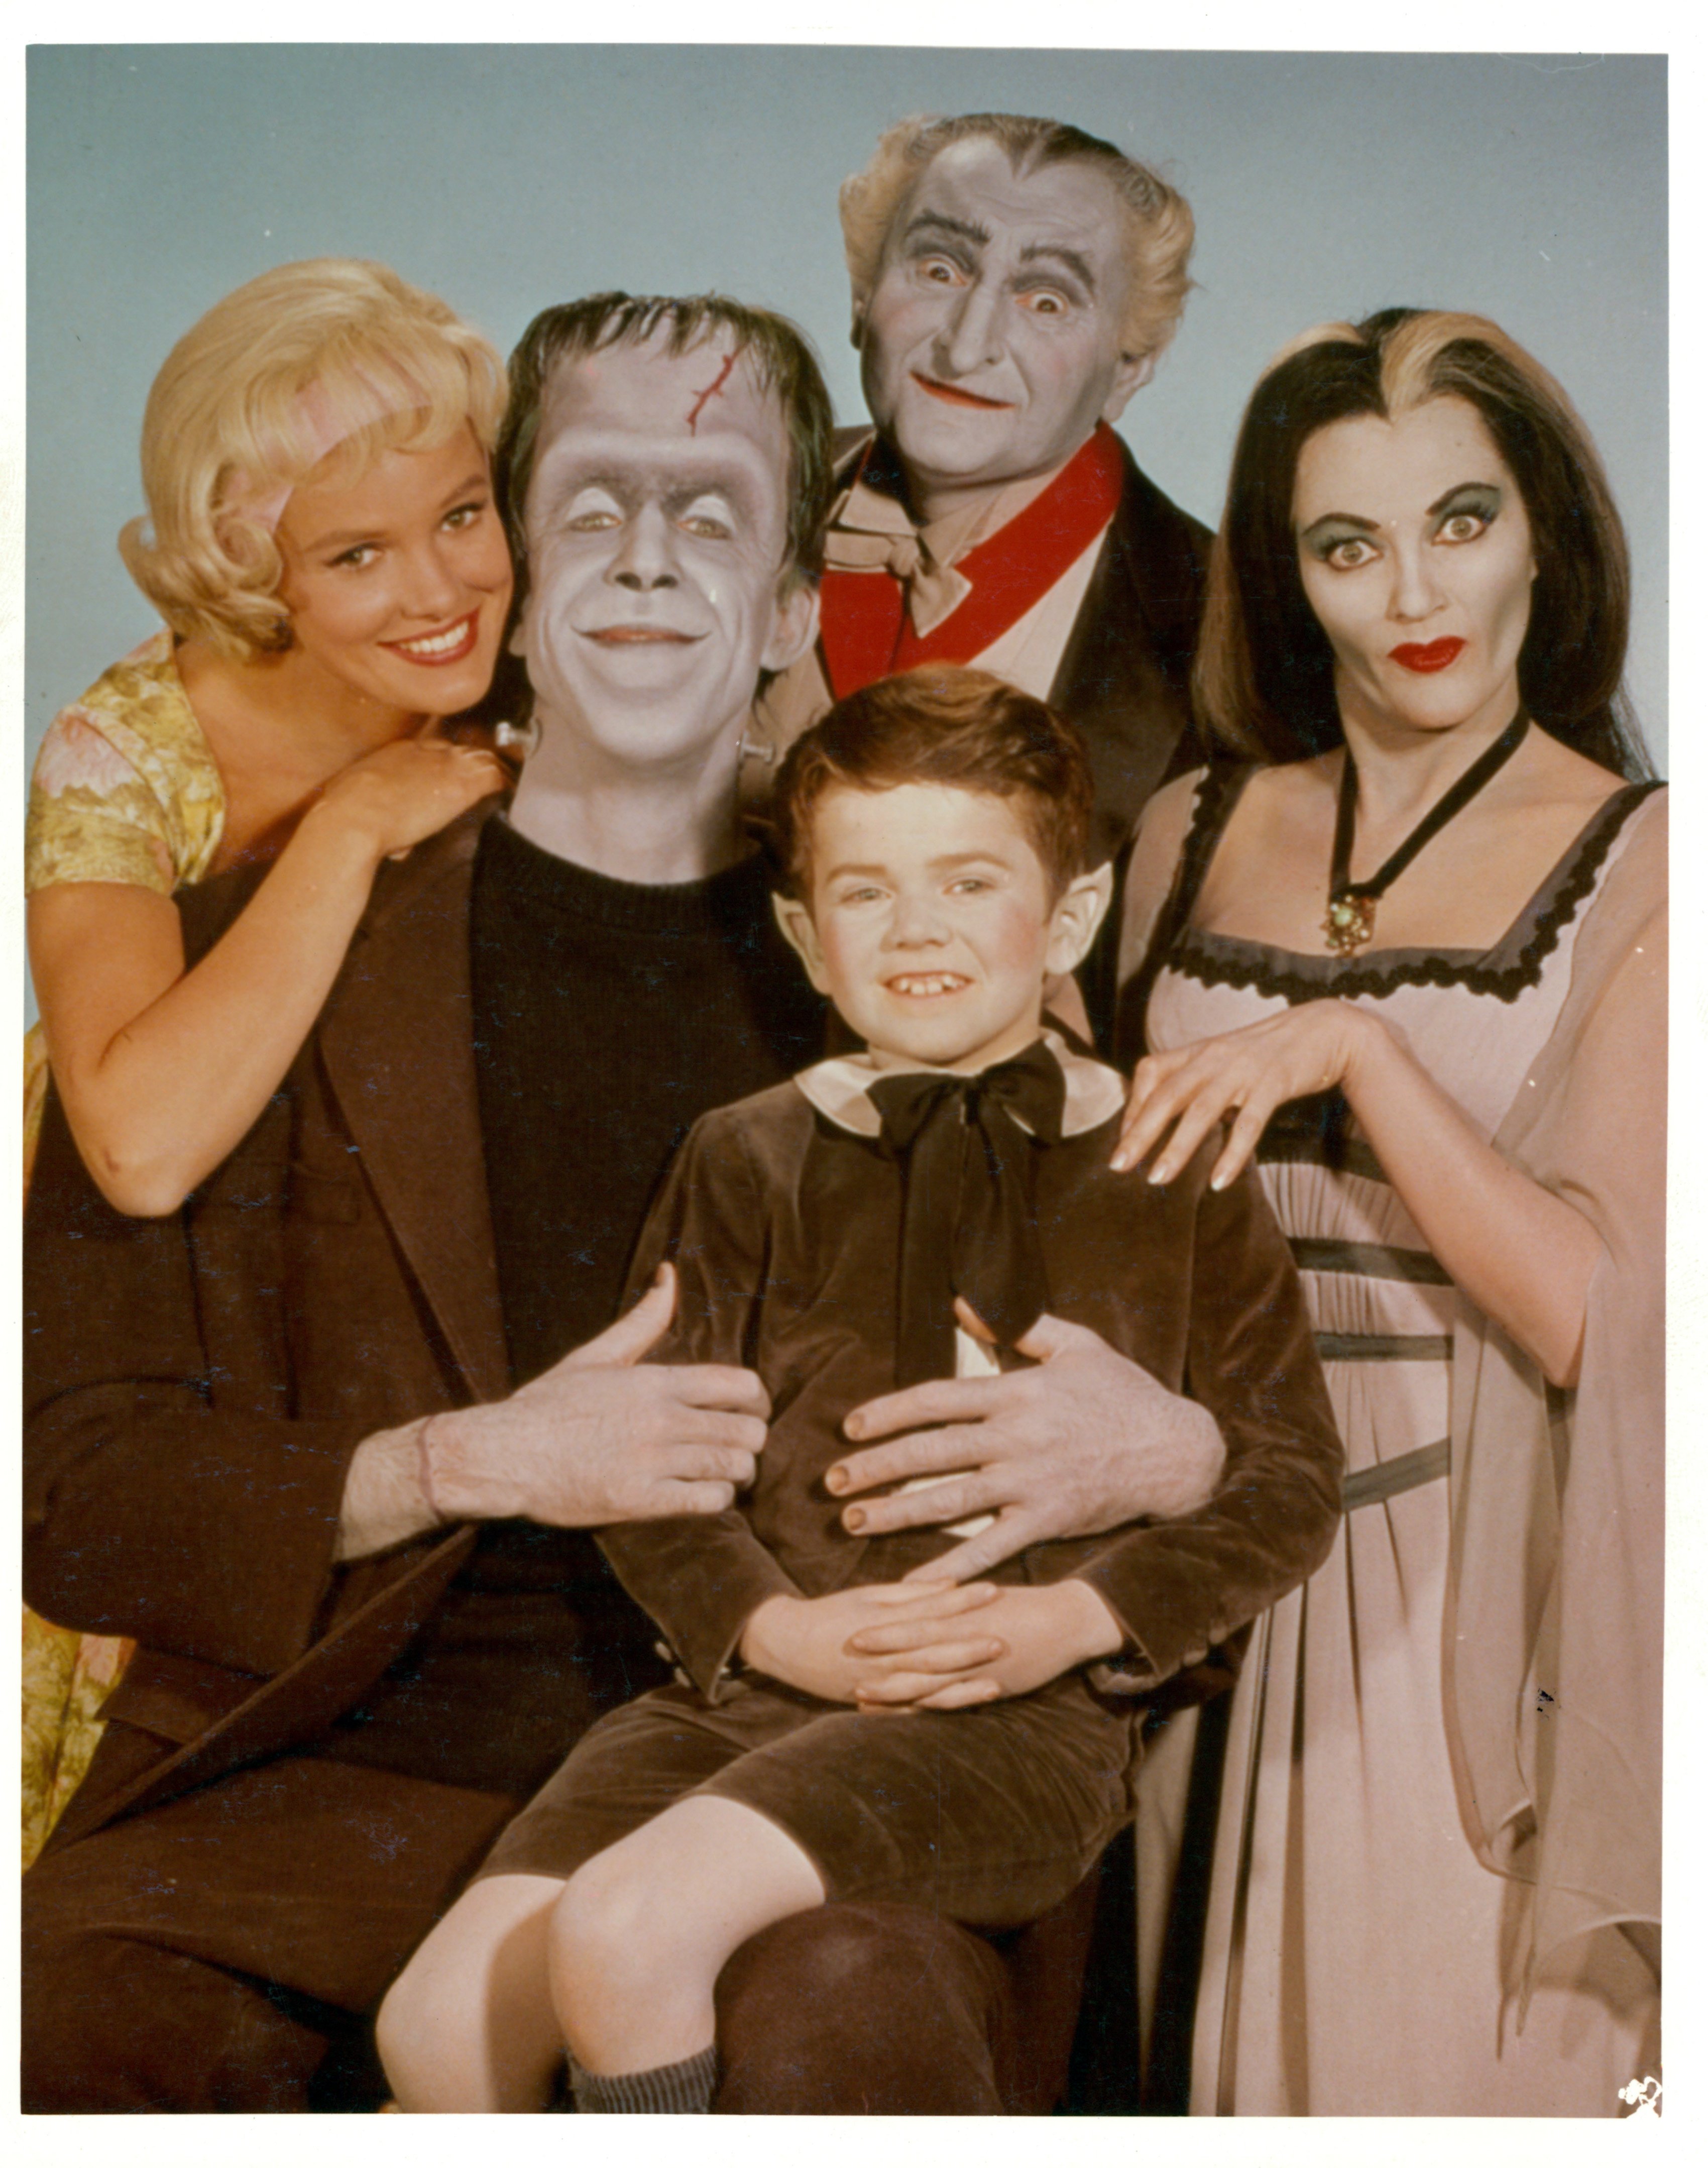 Pat Priest, Al Lewis and Butch Patrick along with Fred Gwynne and Yvonne De Carlo of the Munster family in a publicity photograph from the television series 'The Munsters', circa 1964. I Source: Getty Images